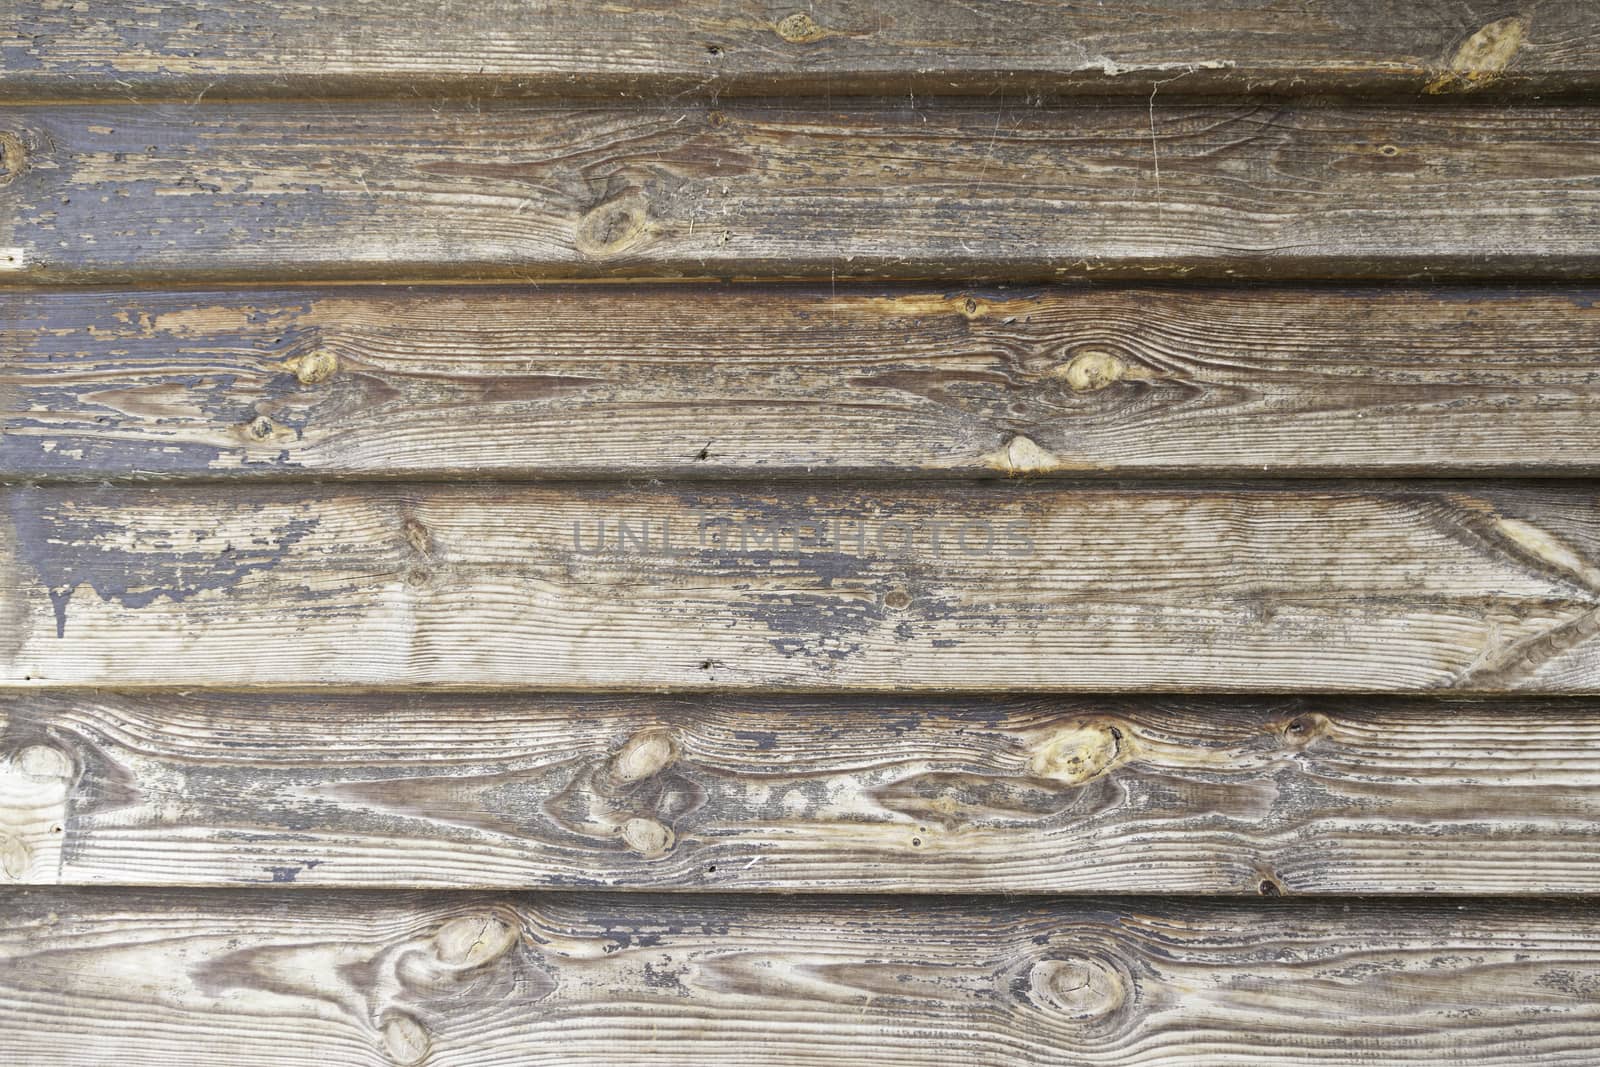 Wooden slats, detail of a wall decorated with wood in the city, wooden textured background